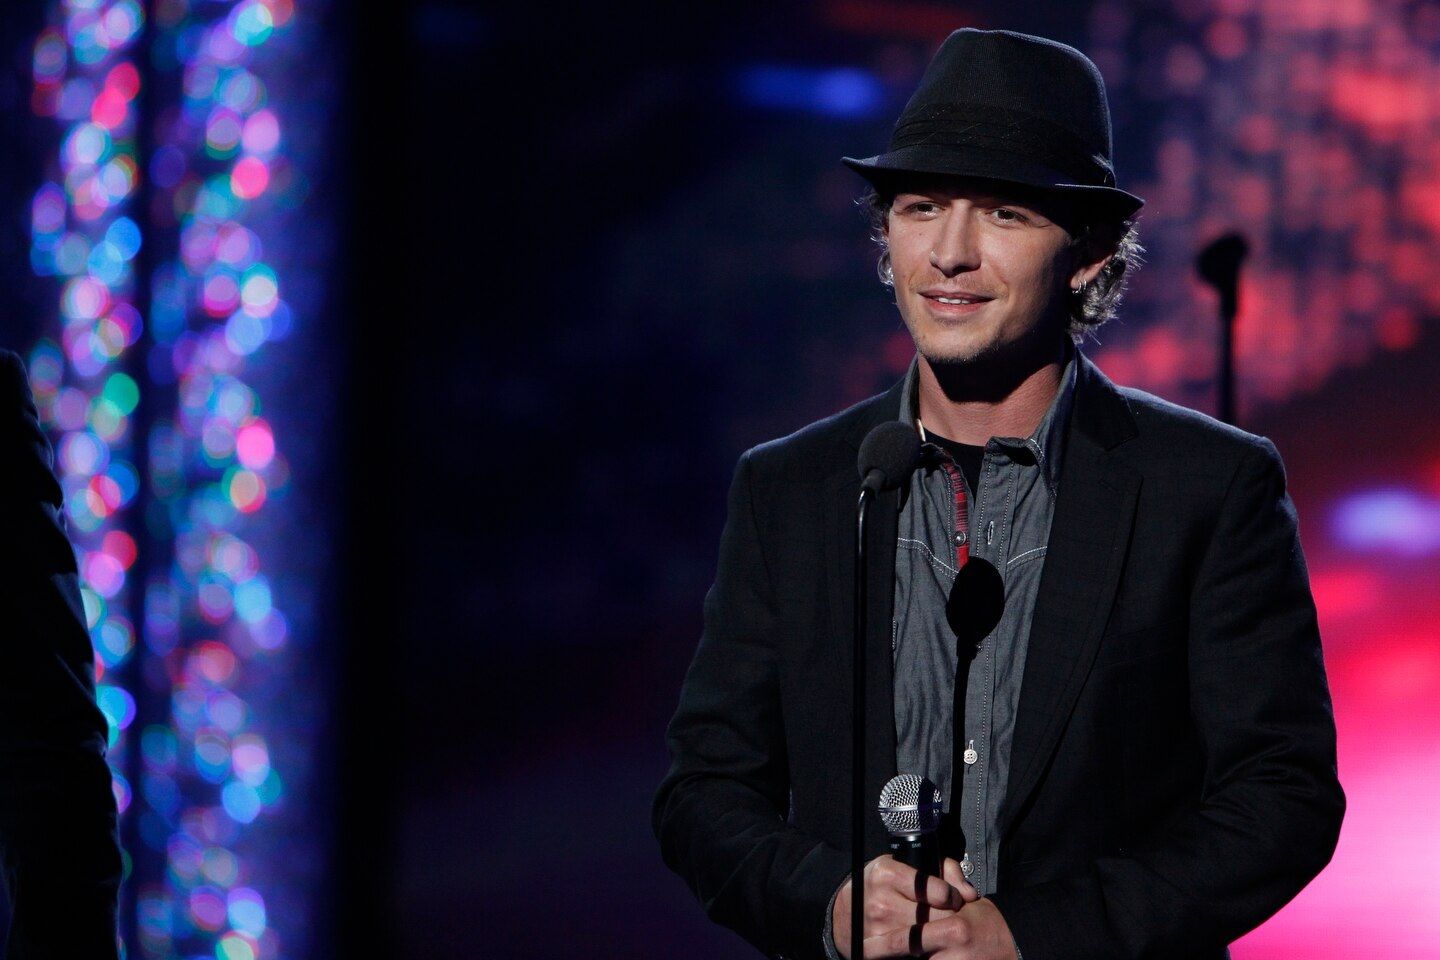 Musician and singer Michael Grimm on America's Got Talent.